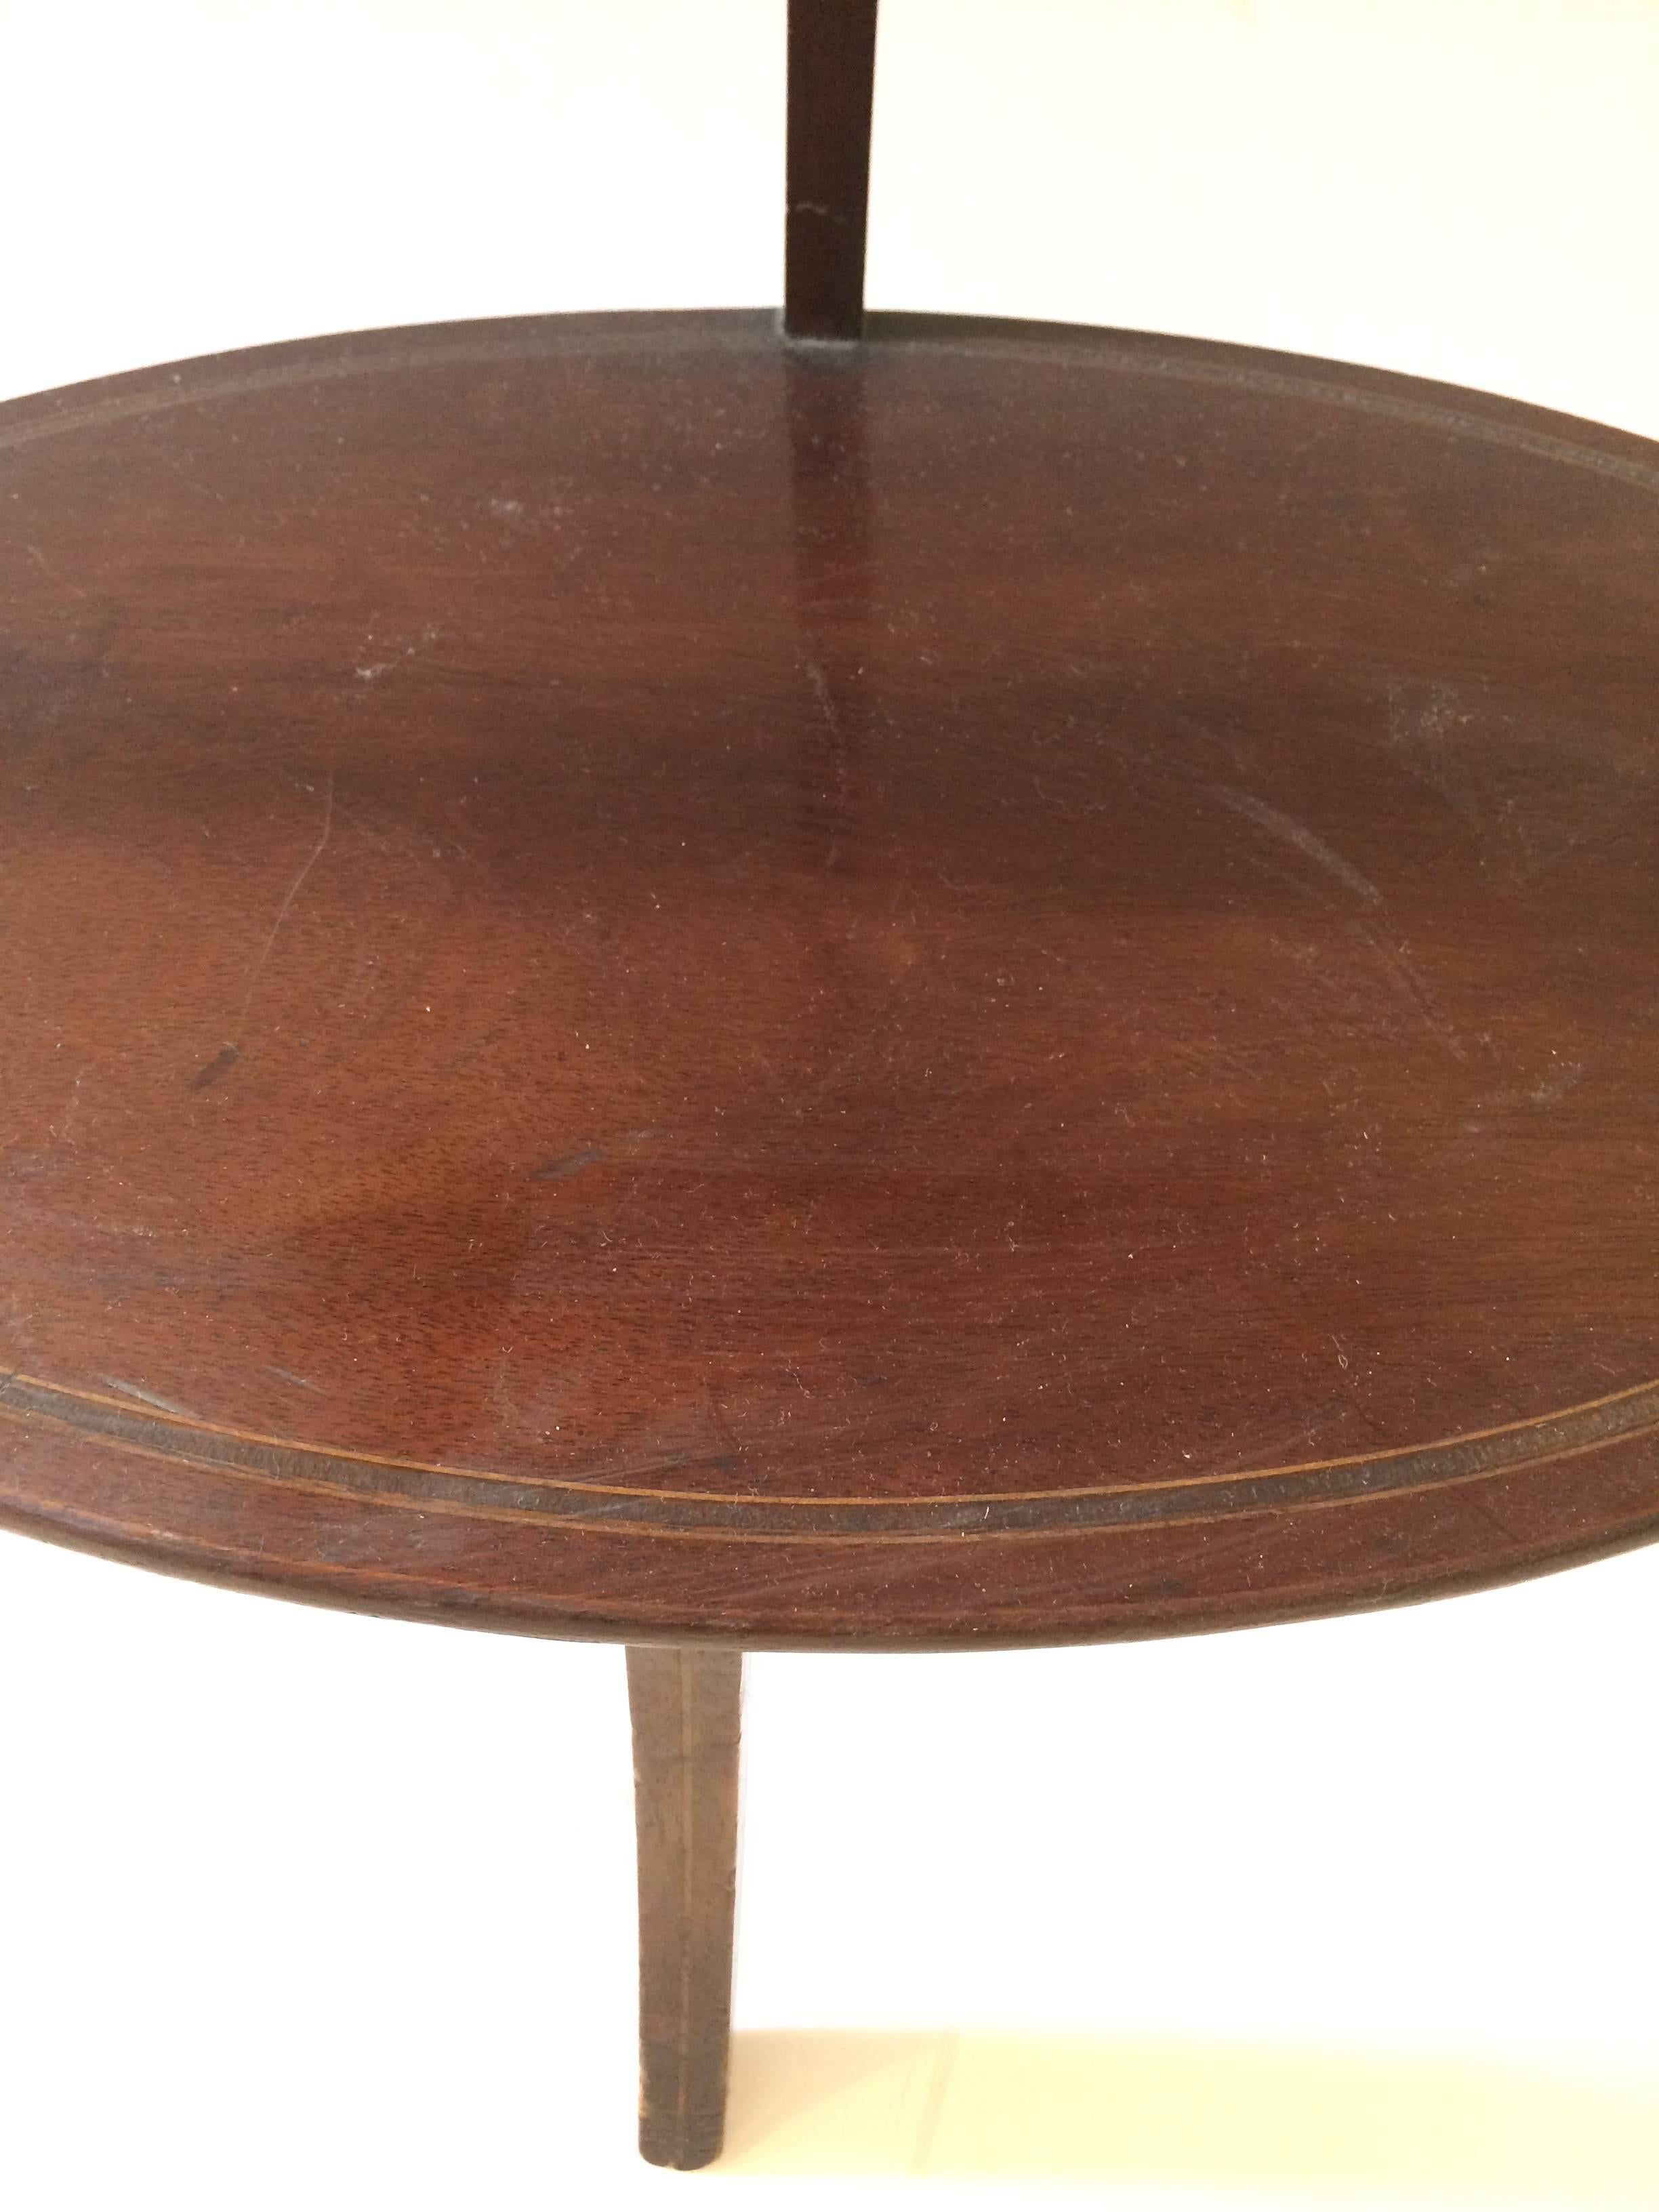 Rare 19th Century English Oval Three-Tier Side Table Muffin Stand In Excellent Condition For Sale In Hopewell, NJ